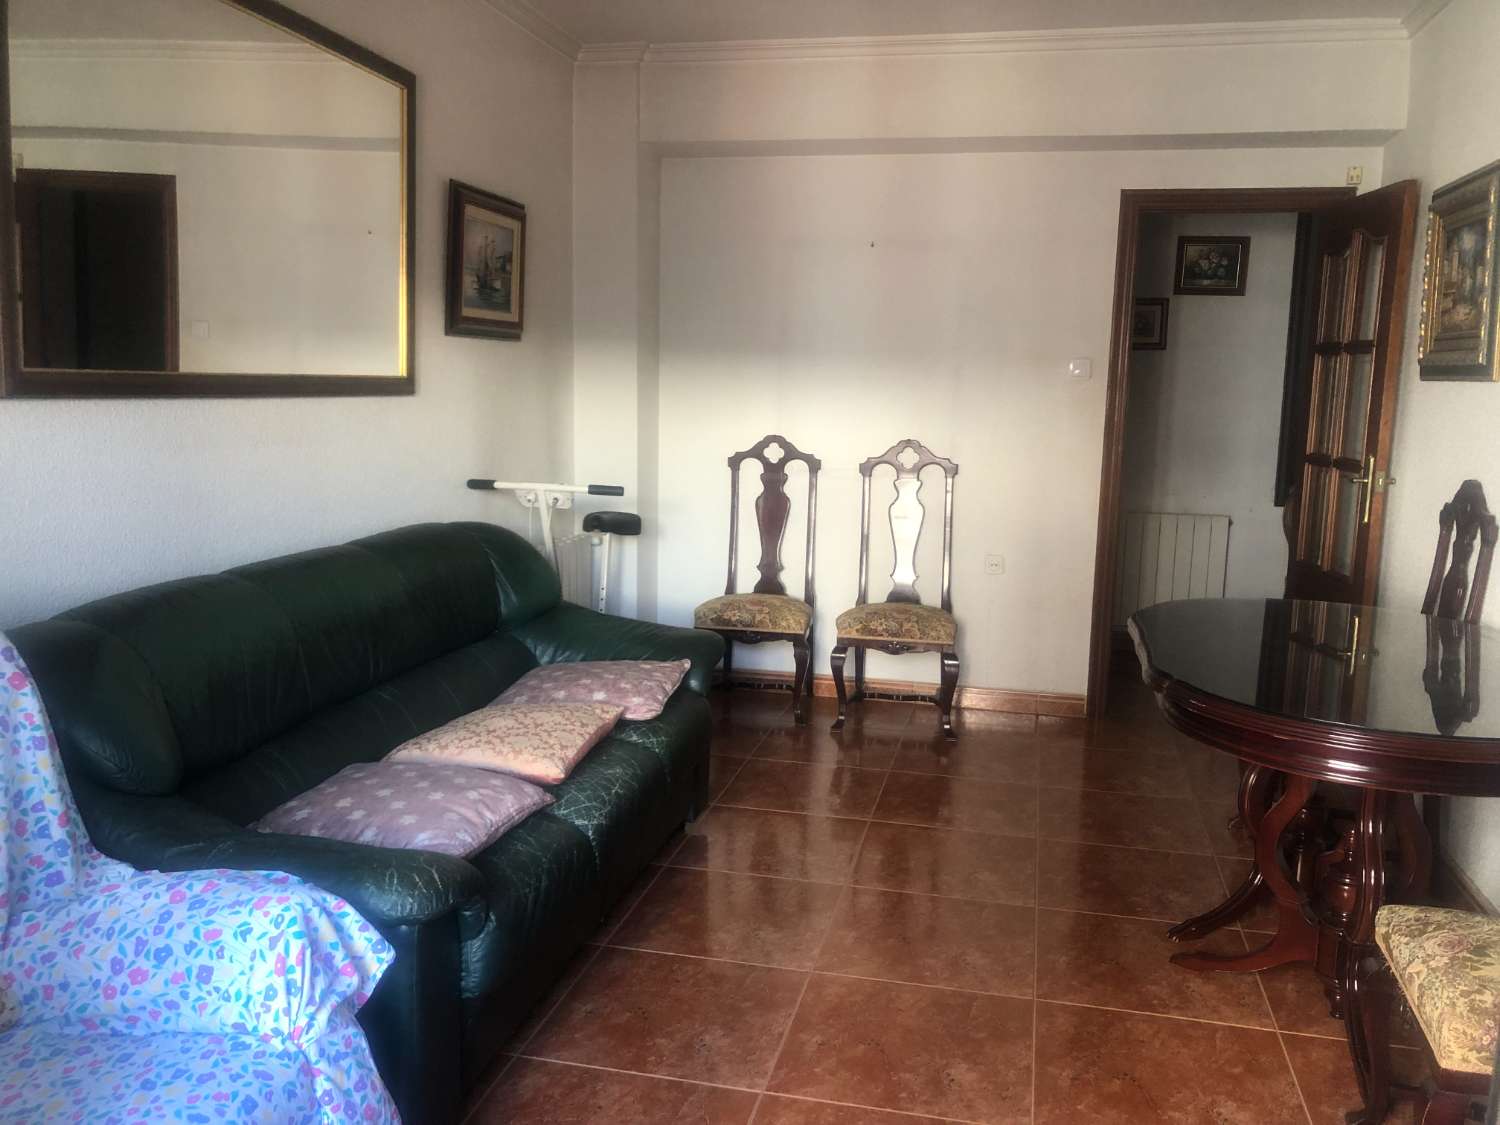 OCCASION APARTMENT IN THE CENTER NEXT TO RENFE